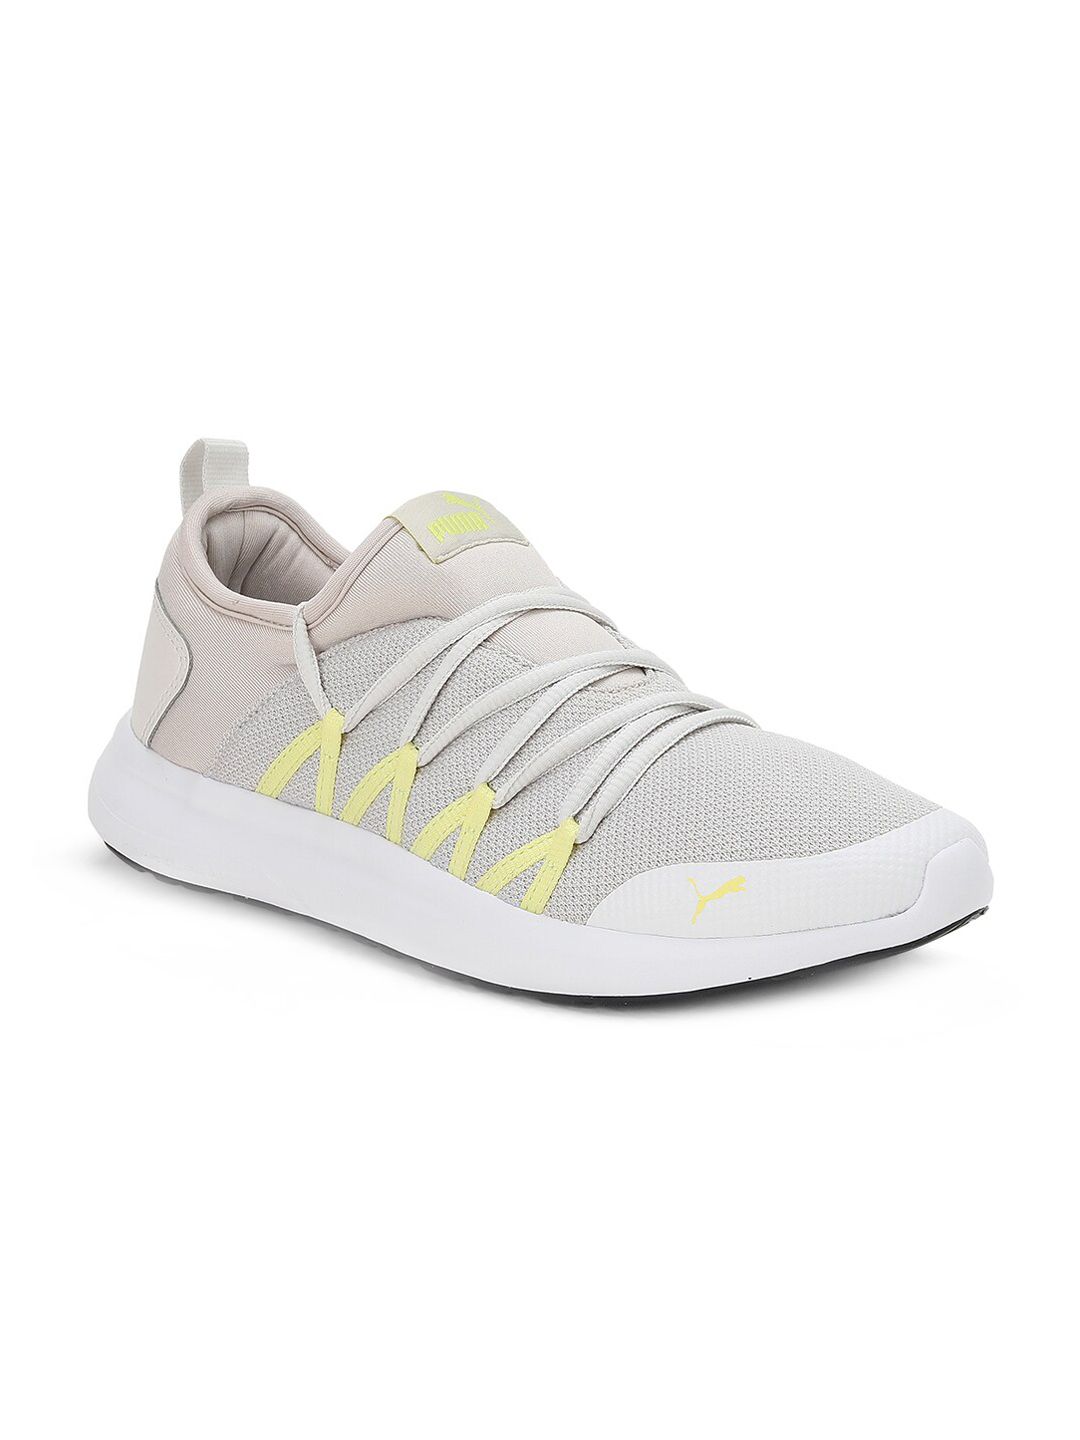 Puma Women Grey Woven Design Maka Casual Shoes Price in India